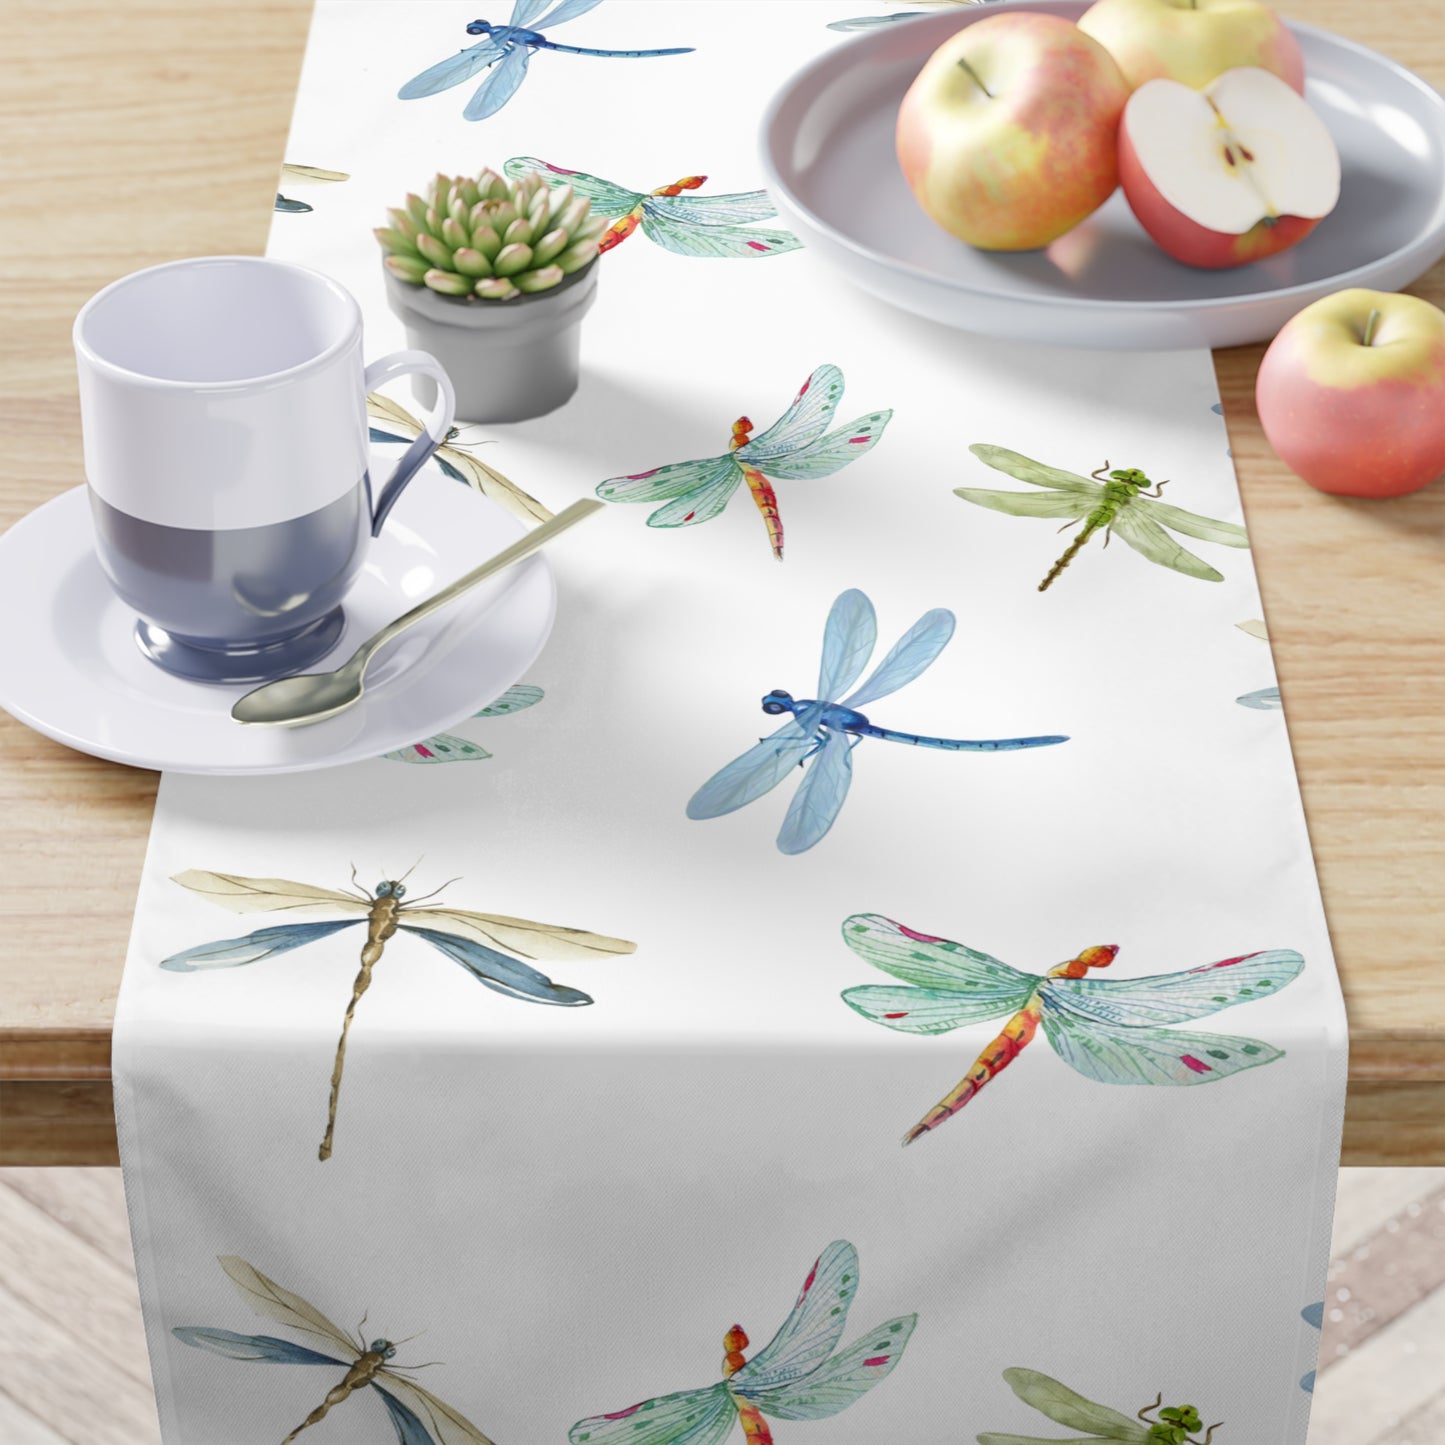 Dragonfly Table Runner / Summer Table Cover